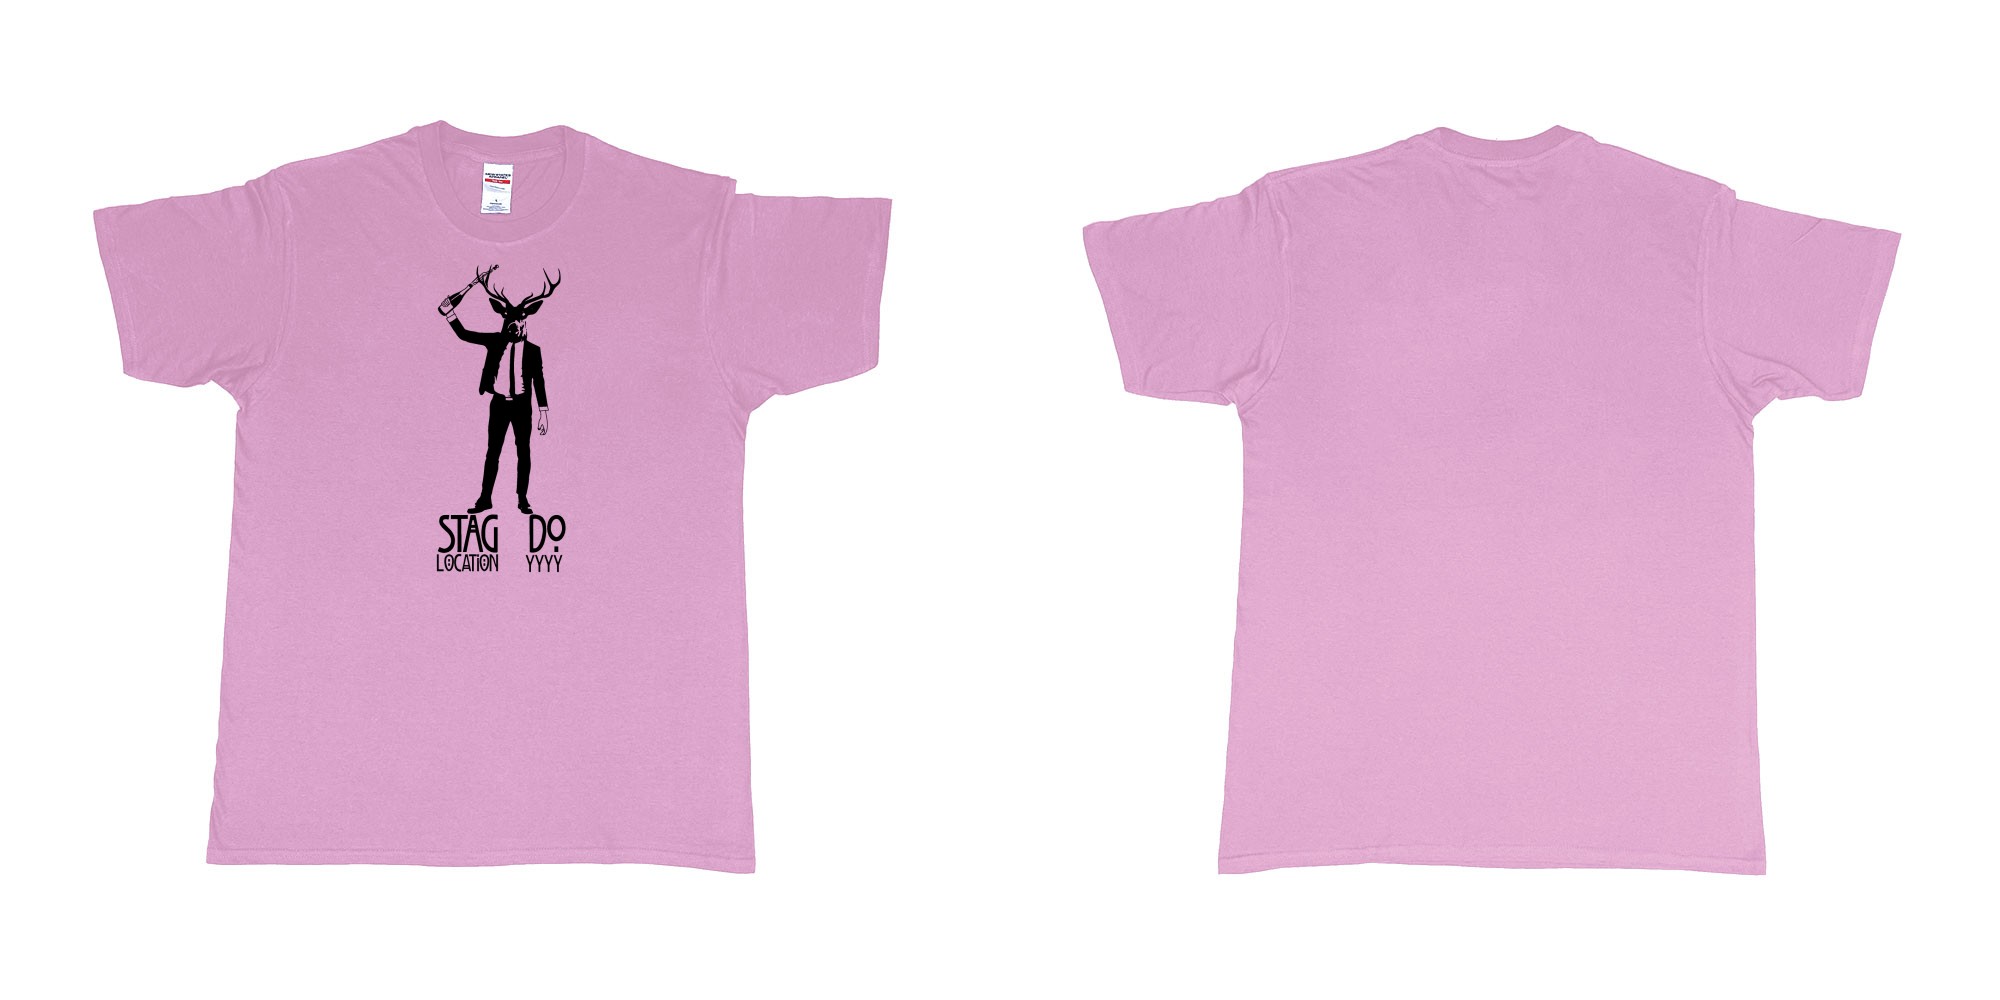 Custom tshirt design stag business man champagne in fabric color light-pink choice your own text made in Bali by The Pirate Way